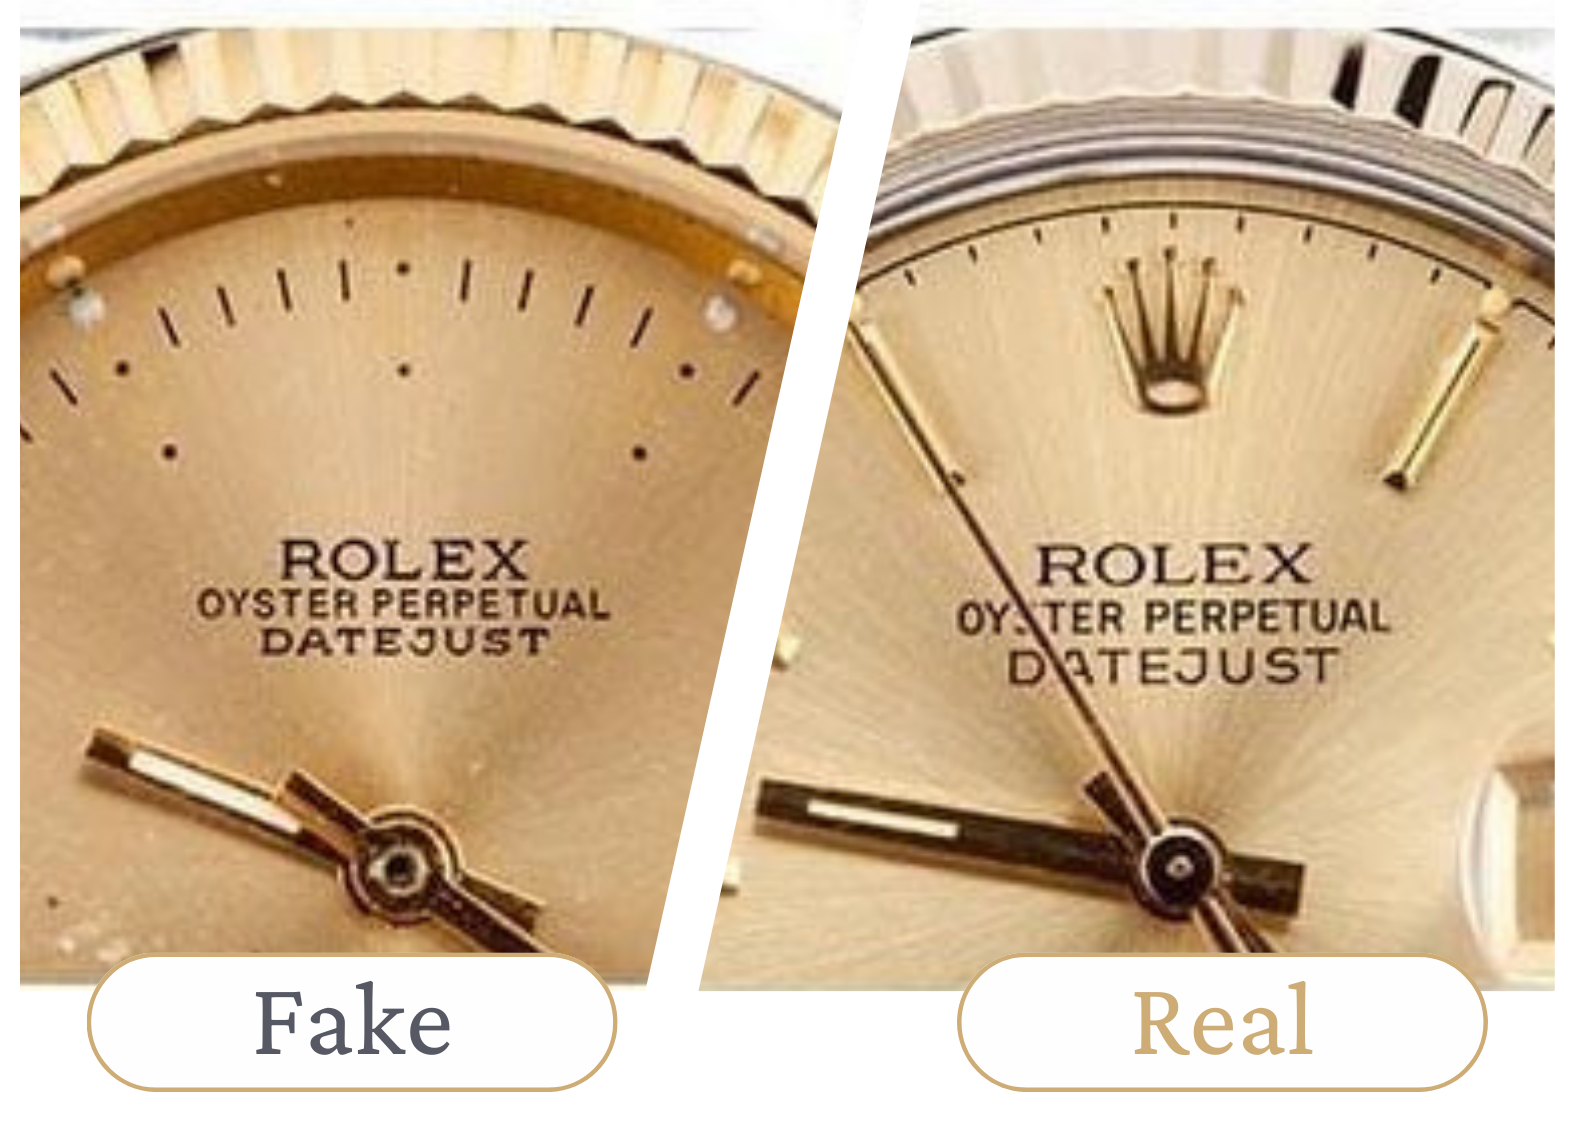 How to Spot a Fake Rolex - Fake VS. Real 1